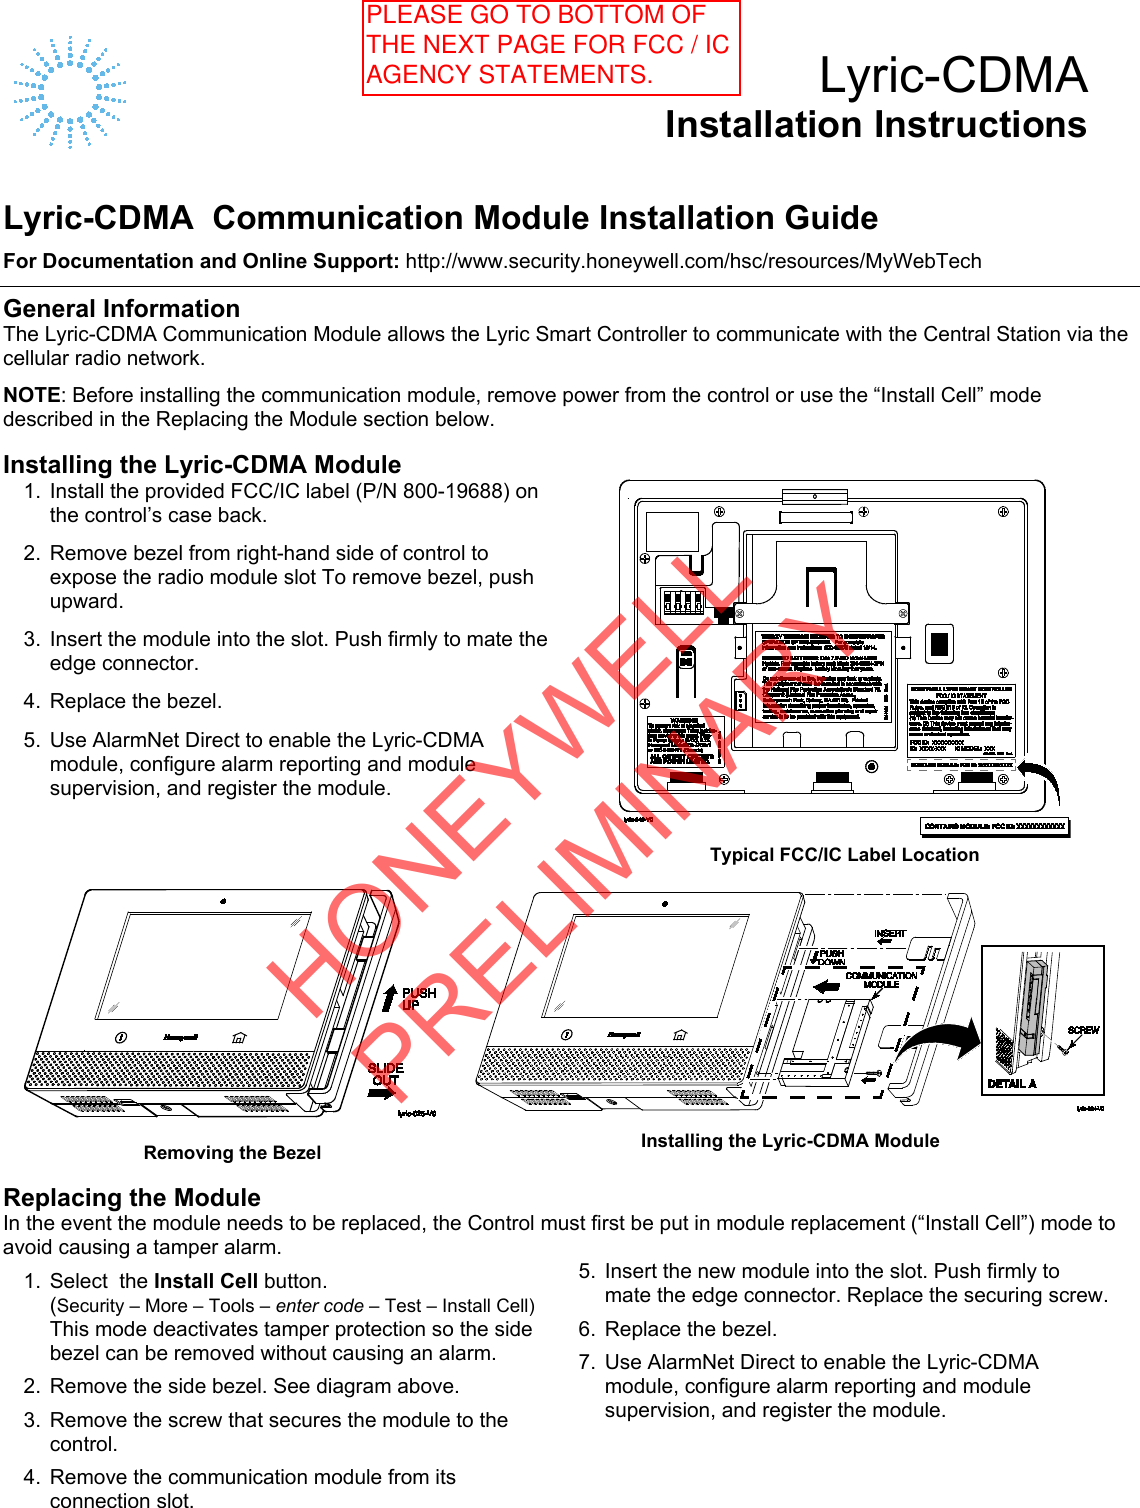    Lyric-CDMA Installation Instructions   Lyric-CDMA  Communication Module Installation Guide For Documentation and Online Support: http://www.security.honeywell.com/hsc/resources/MyWebTech  General Information The Lyric-CDMA Communication Module allows the Lyric Smart Controller to communicate with the Central Station via the cellular radio network. NOTE: Before installing the communication module, remove power from the control or use the “Install Cell” mode described in the Replacing the Module section below.  Installing the Lyric-CDMA Module 1. Install the provided FCC/IC label (P/N 800-19688) on the control’s case back.  2. Remove bezel from right-hand side of control to expose the radio module slot To remove bezel, push upward.  3. Insert the module into the slot. Push firmly to mate the edge connector.  4. Replace the bezel.  5. Use AlarmNet Direct to enable the Lyric-CDMA module, configure alarm reporting and module supervision, and register the module.  Typical FCC/IC Label Location     Removing the Bezel    Installing the Lyric-CDMA Module  Replacing the Module In the event the module needs to be replaced, the Control must first be put in module replacement (“Install Cell”) mode to avoid causing a tamper alarm.  1. Select  the Install Cell button.    (Security – More – Tools – enter code – Test – Install Cell)  This mode deactivates tamper protection so the side bezel can be removed without causing an alarm.  2. Remove the side bezel. See diagram above.  3. Remove the screw that secures the module to the control.  4. Remove the communication module from its connection slot. 5. Insert the new module into the slot. Push firmly to mate the edge connector. Replace the securing screw.  6.  Replace the bezel.  7.  Use AlarmNet Direct to enable the Lyric-CDMA module, configure alarm reporting and module supervision, and register the module.   HONEYWELL PRELIMINARYPLEASE GO TO BOTTOM OF THE NEXT PAGE FOR FCC / IC AGENCY STATEMENTS. 